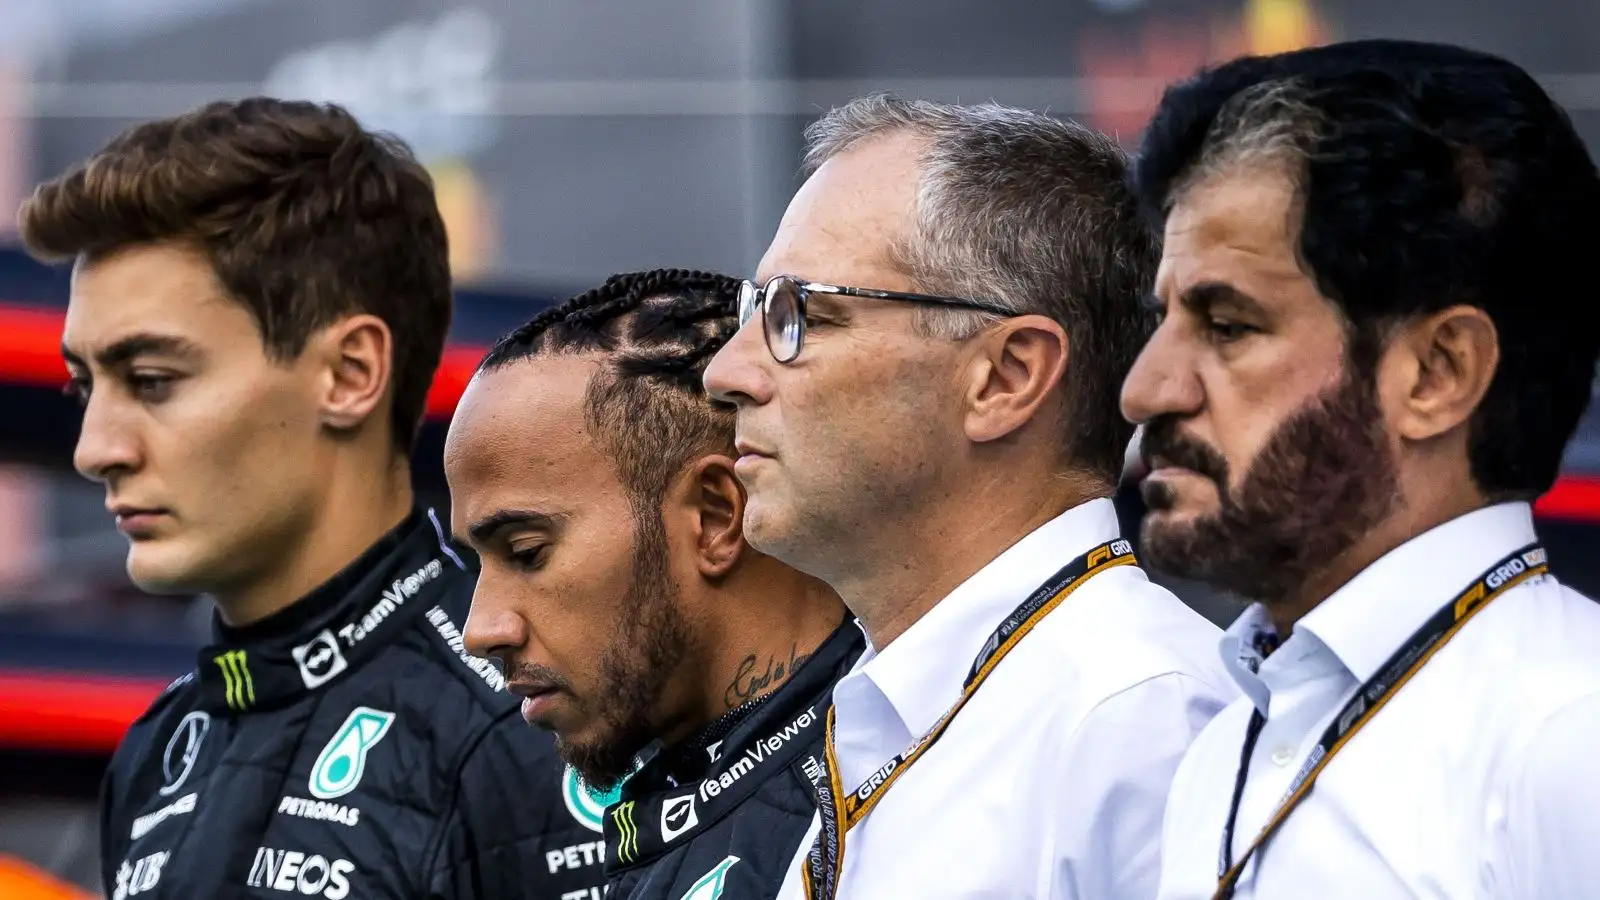 George Russell (Mercedes), Lewis Hamilton (Mercedes), Stefano Domenicali (F1) and Mohammed Ben Sulayem. F1 Monza, September 2022.